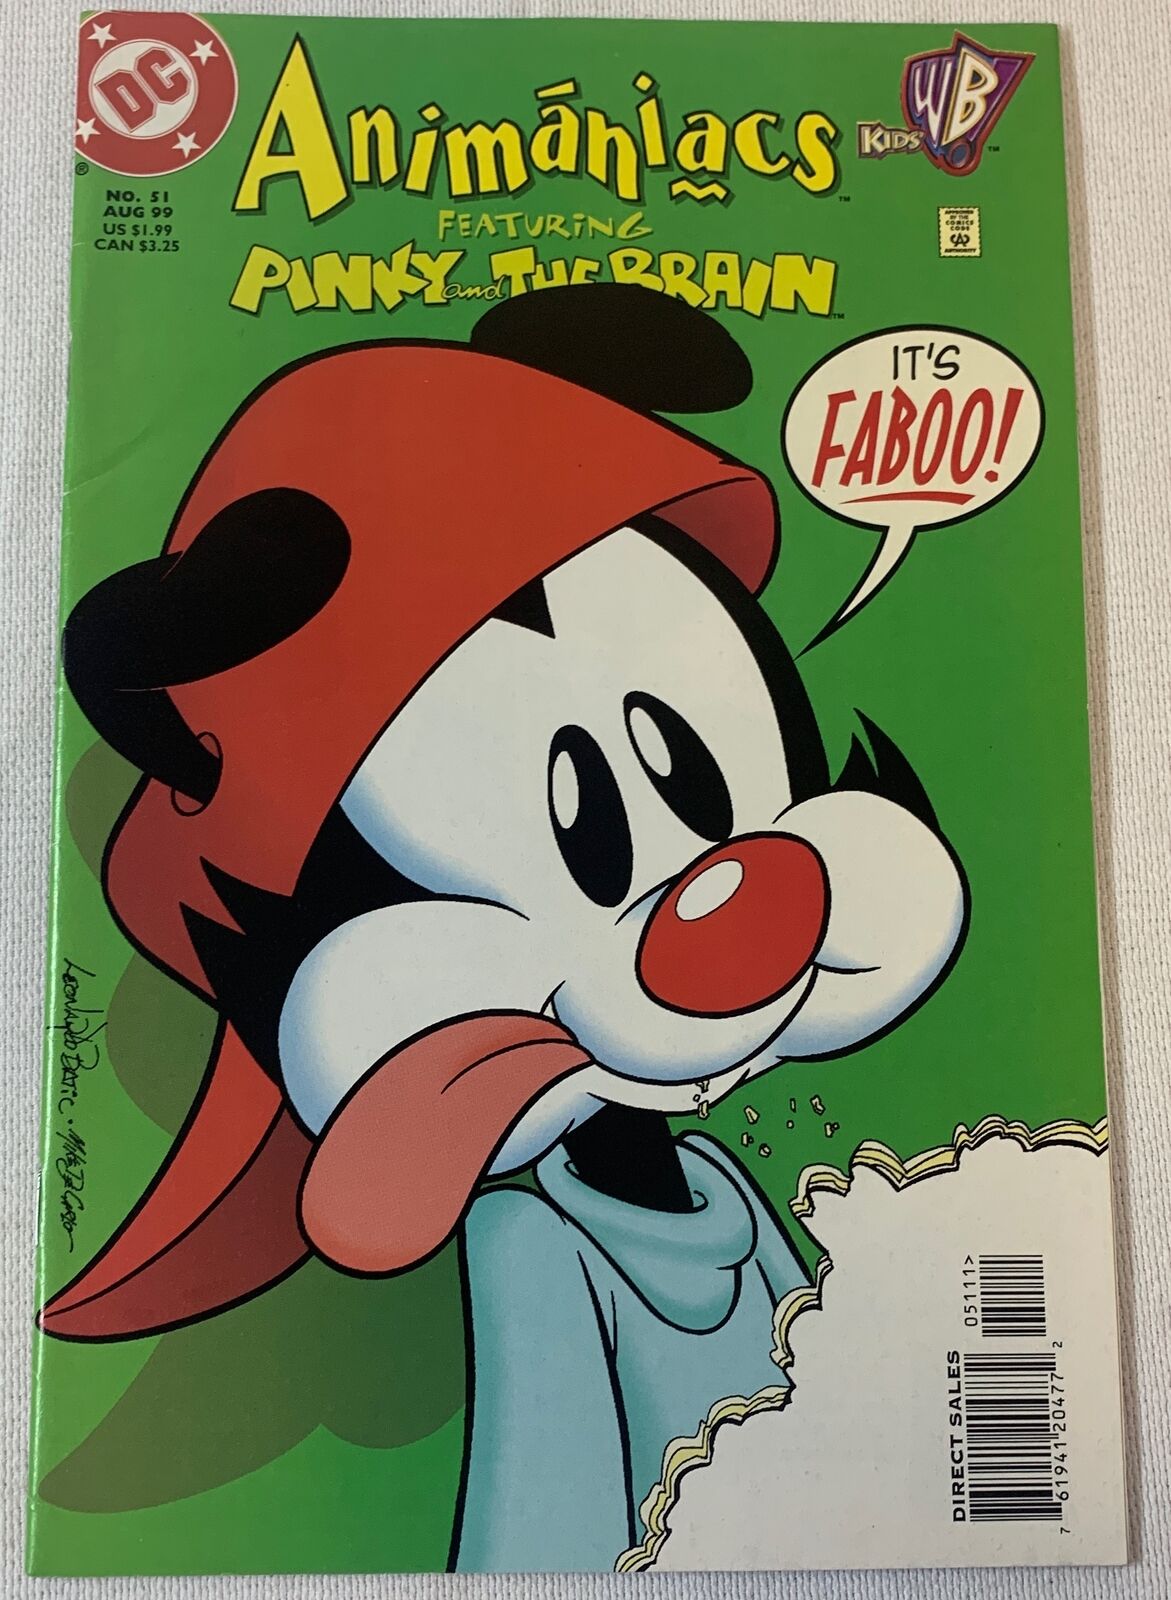 ANIMANIACS #51 - has spine stresses and small corner crease